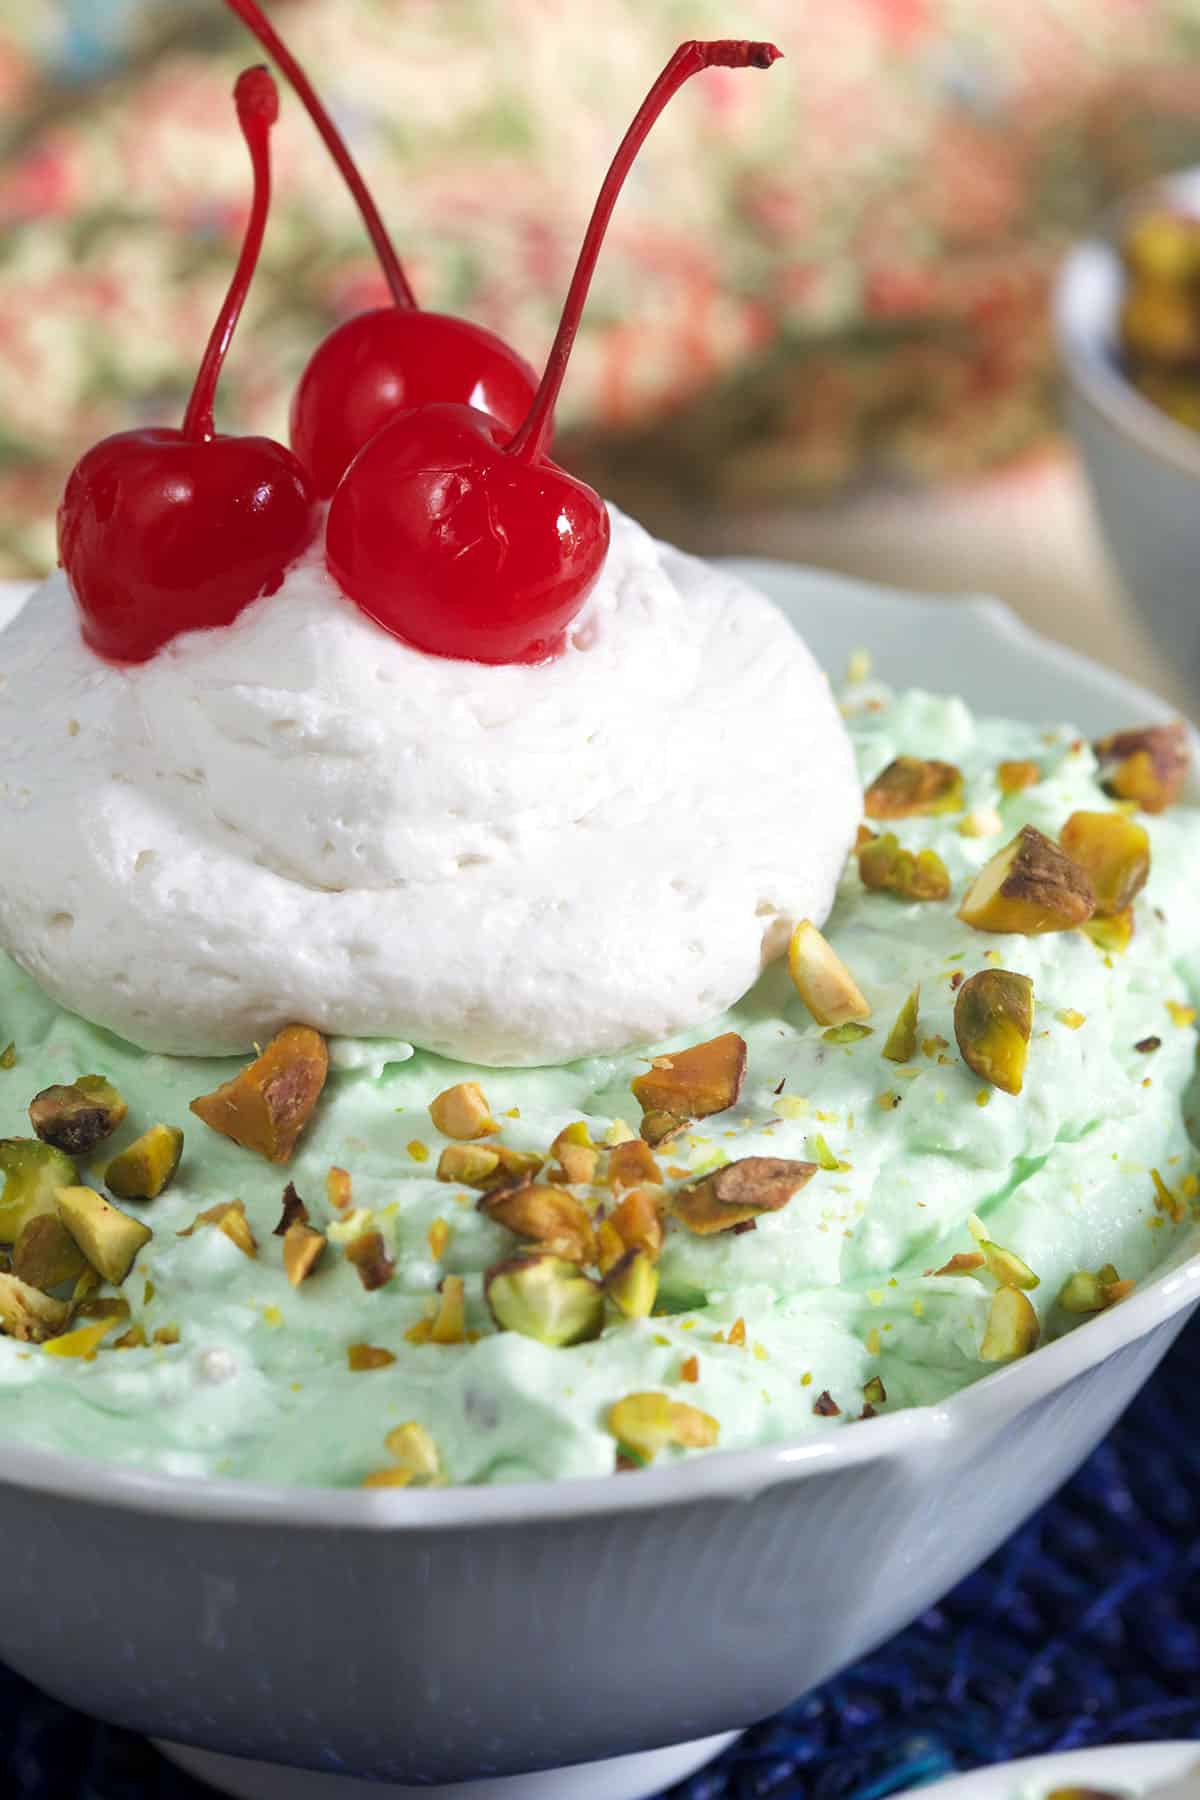 A dollop of whipped cream and three cherries is placed on top of watergate salad.